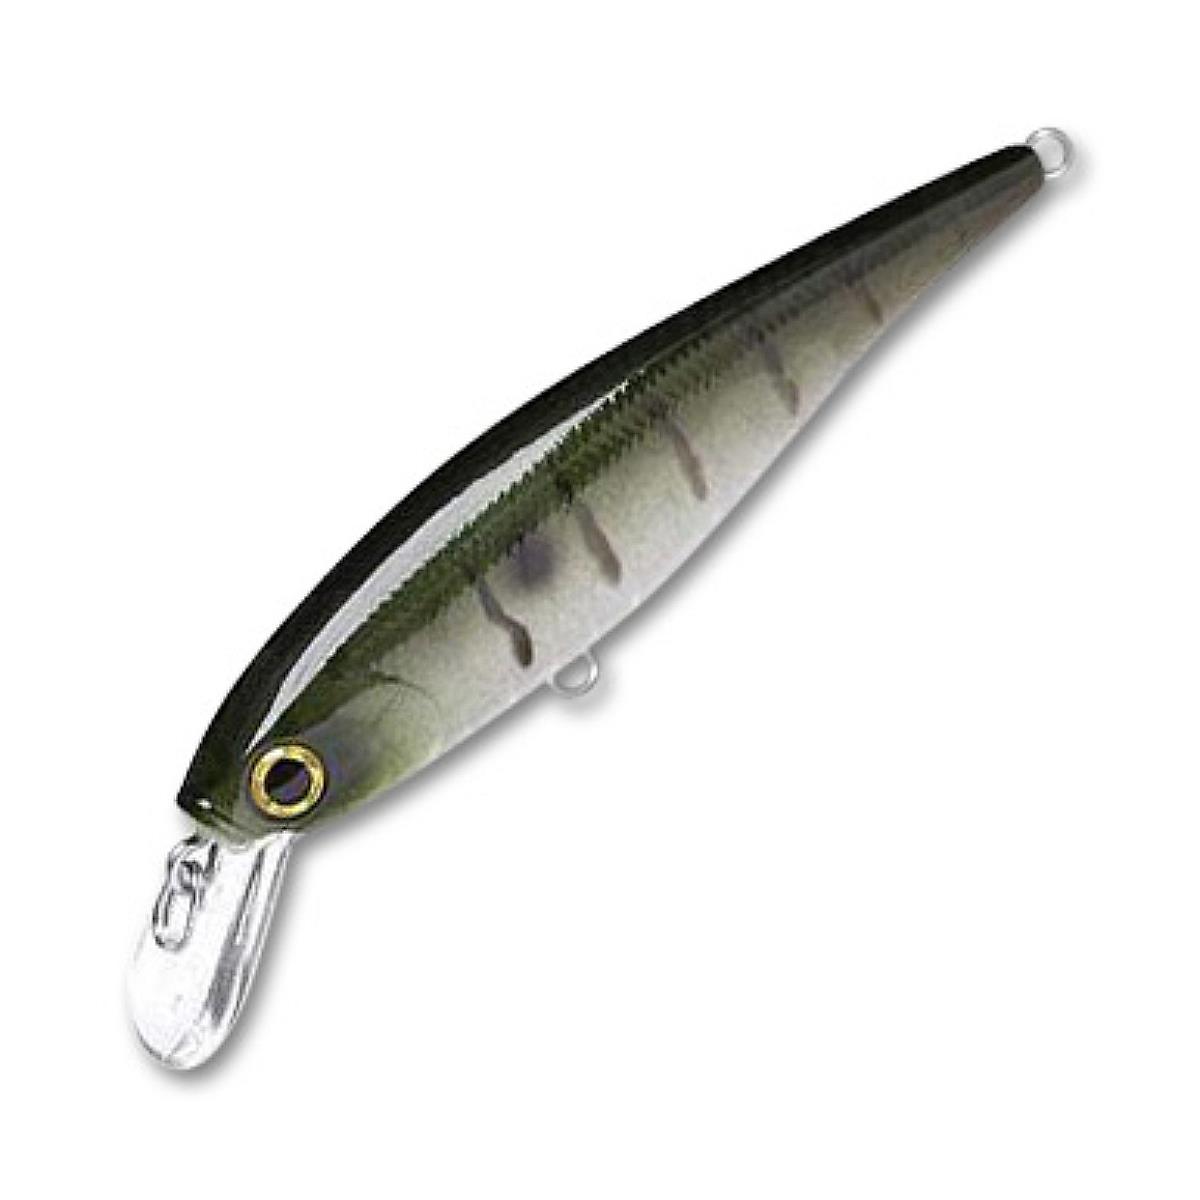 воблер pointer 78dd 250 chartreuse shad lucky craft Воблер Pointer 78-315 Snatcher Lucky Craft